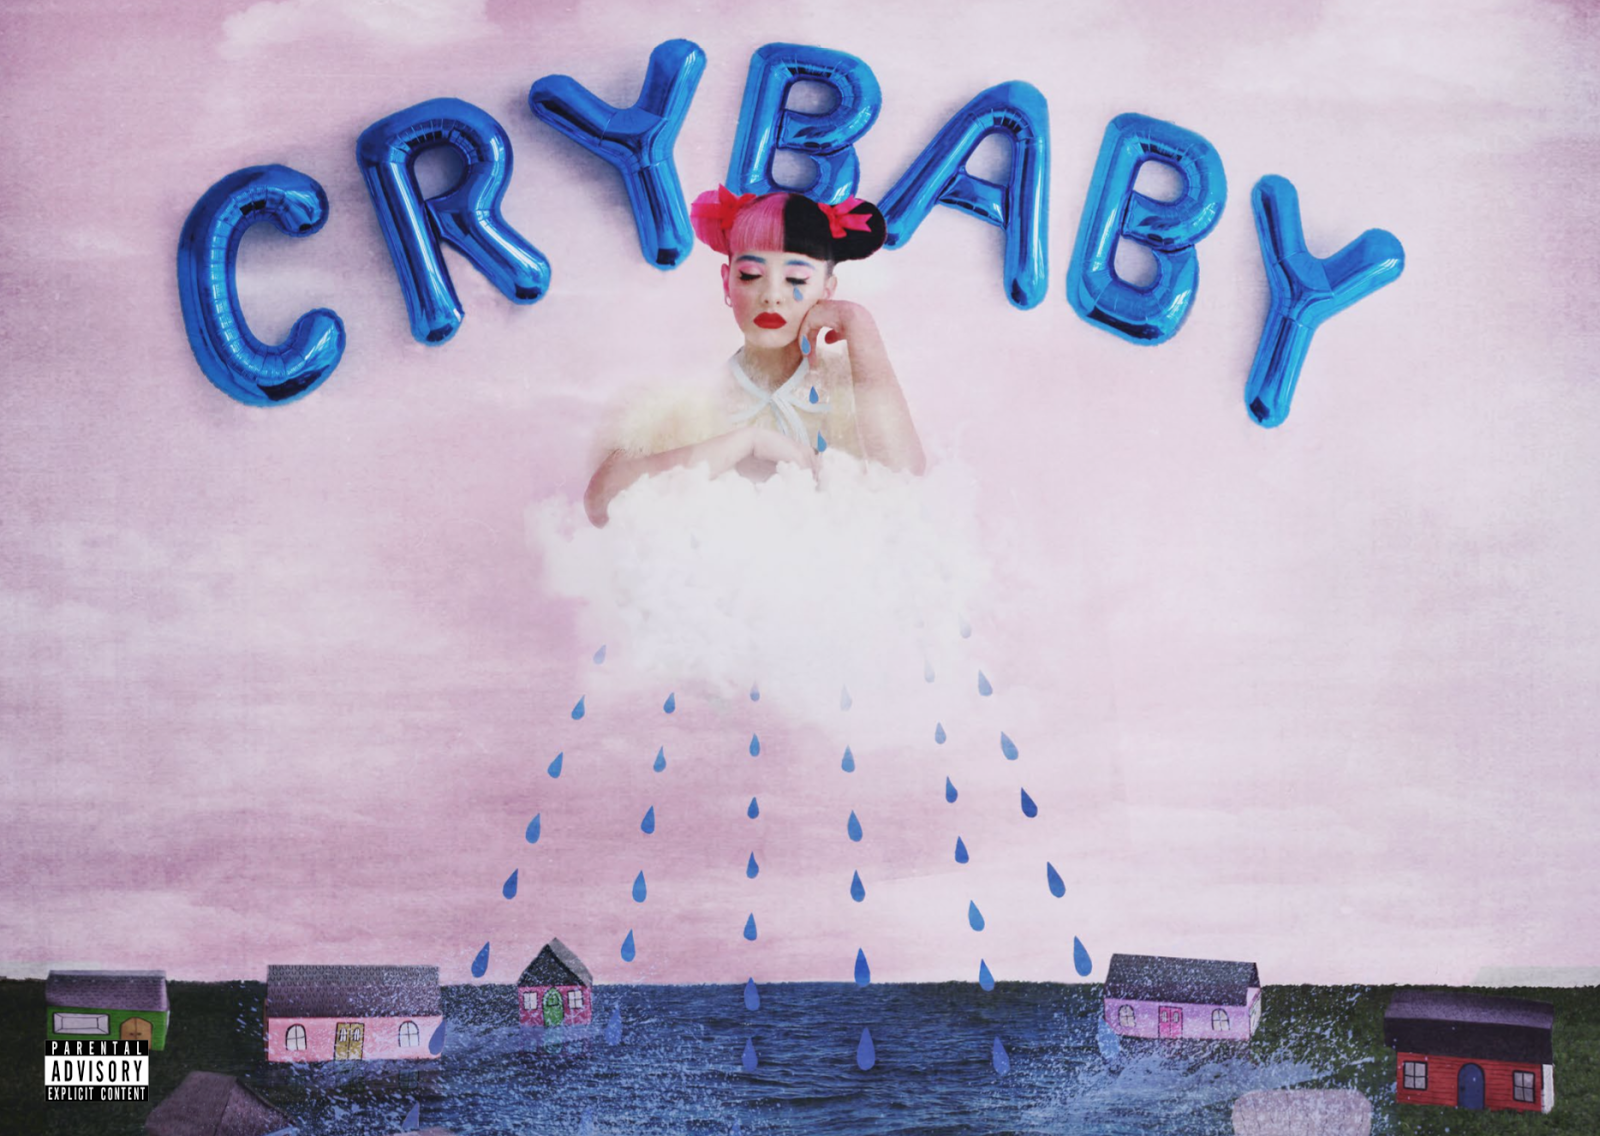 Cry baby мелани мартинес. Мелани Crybaby. Край бэби Мелани Мартинес. Crybaby Melanie Martinez альбом. Мелани Мартинес 2023.